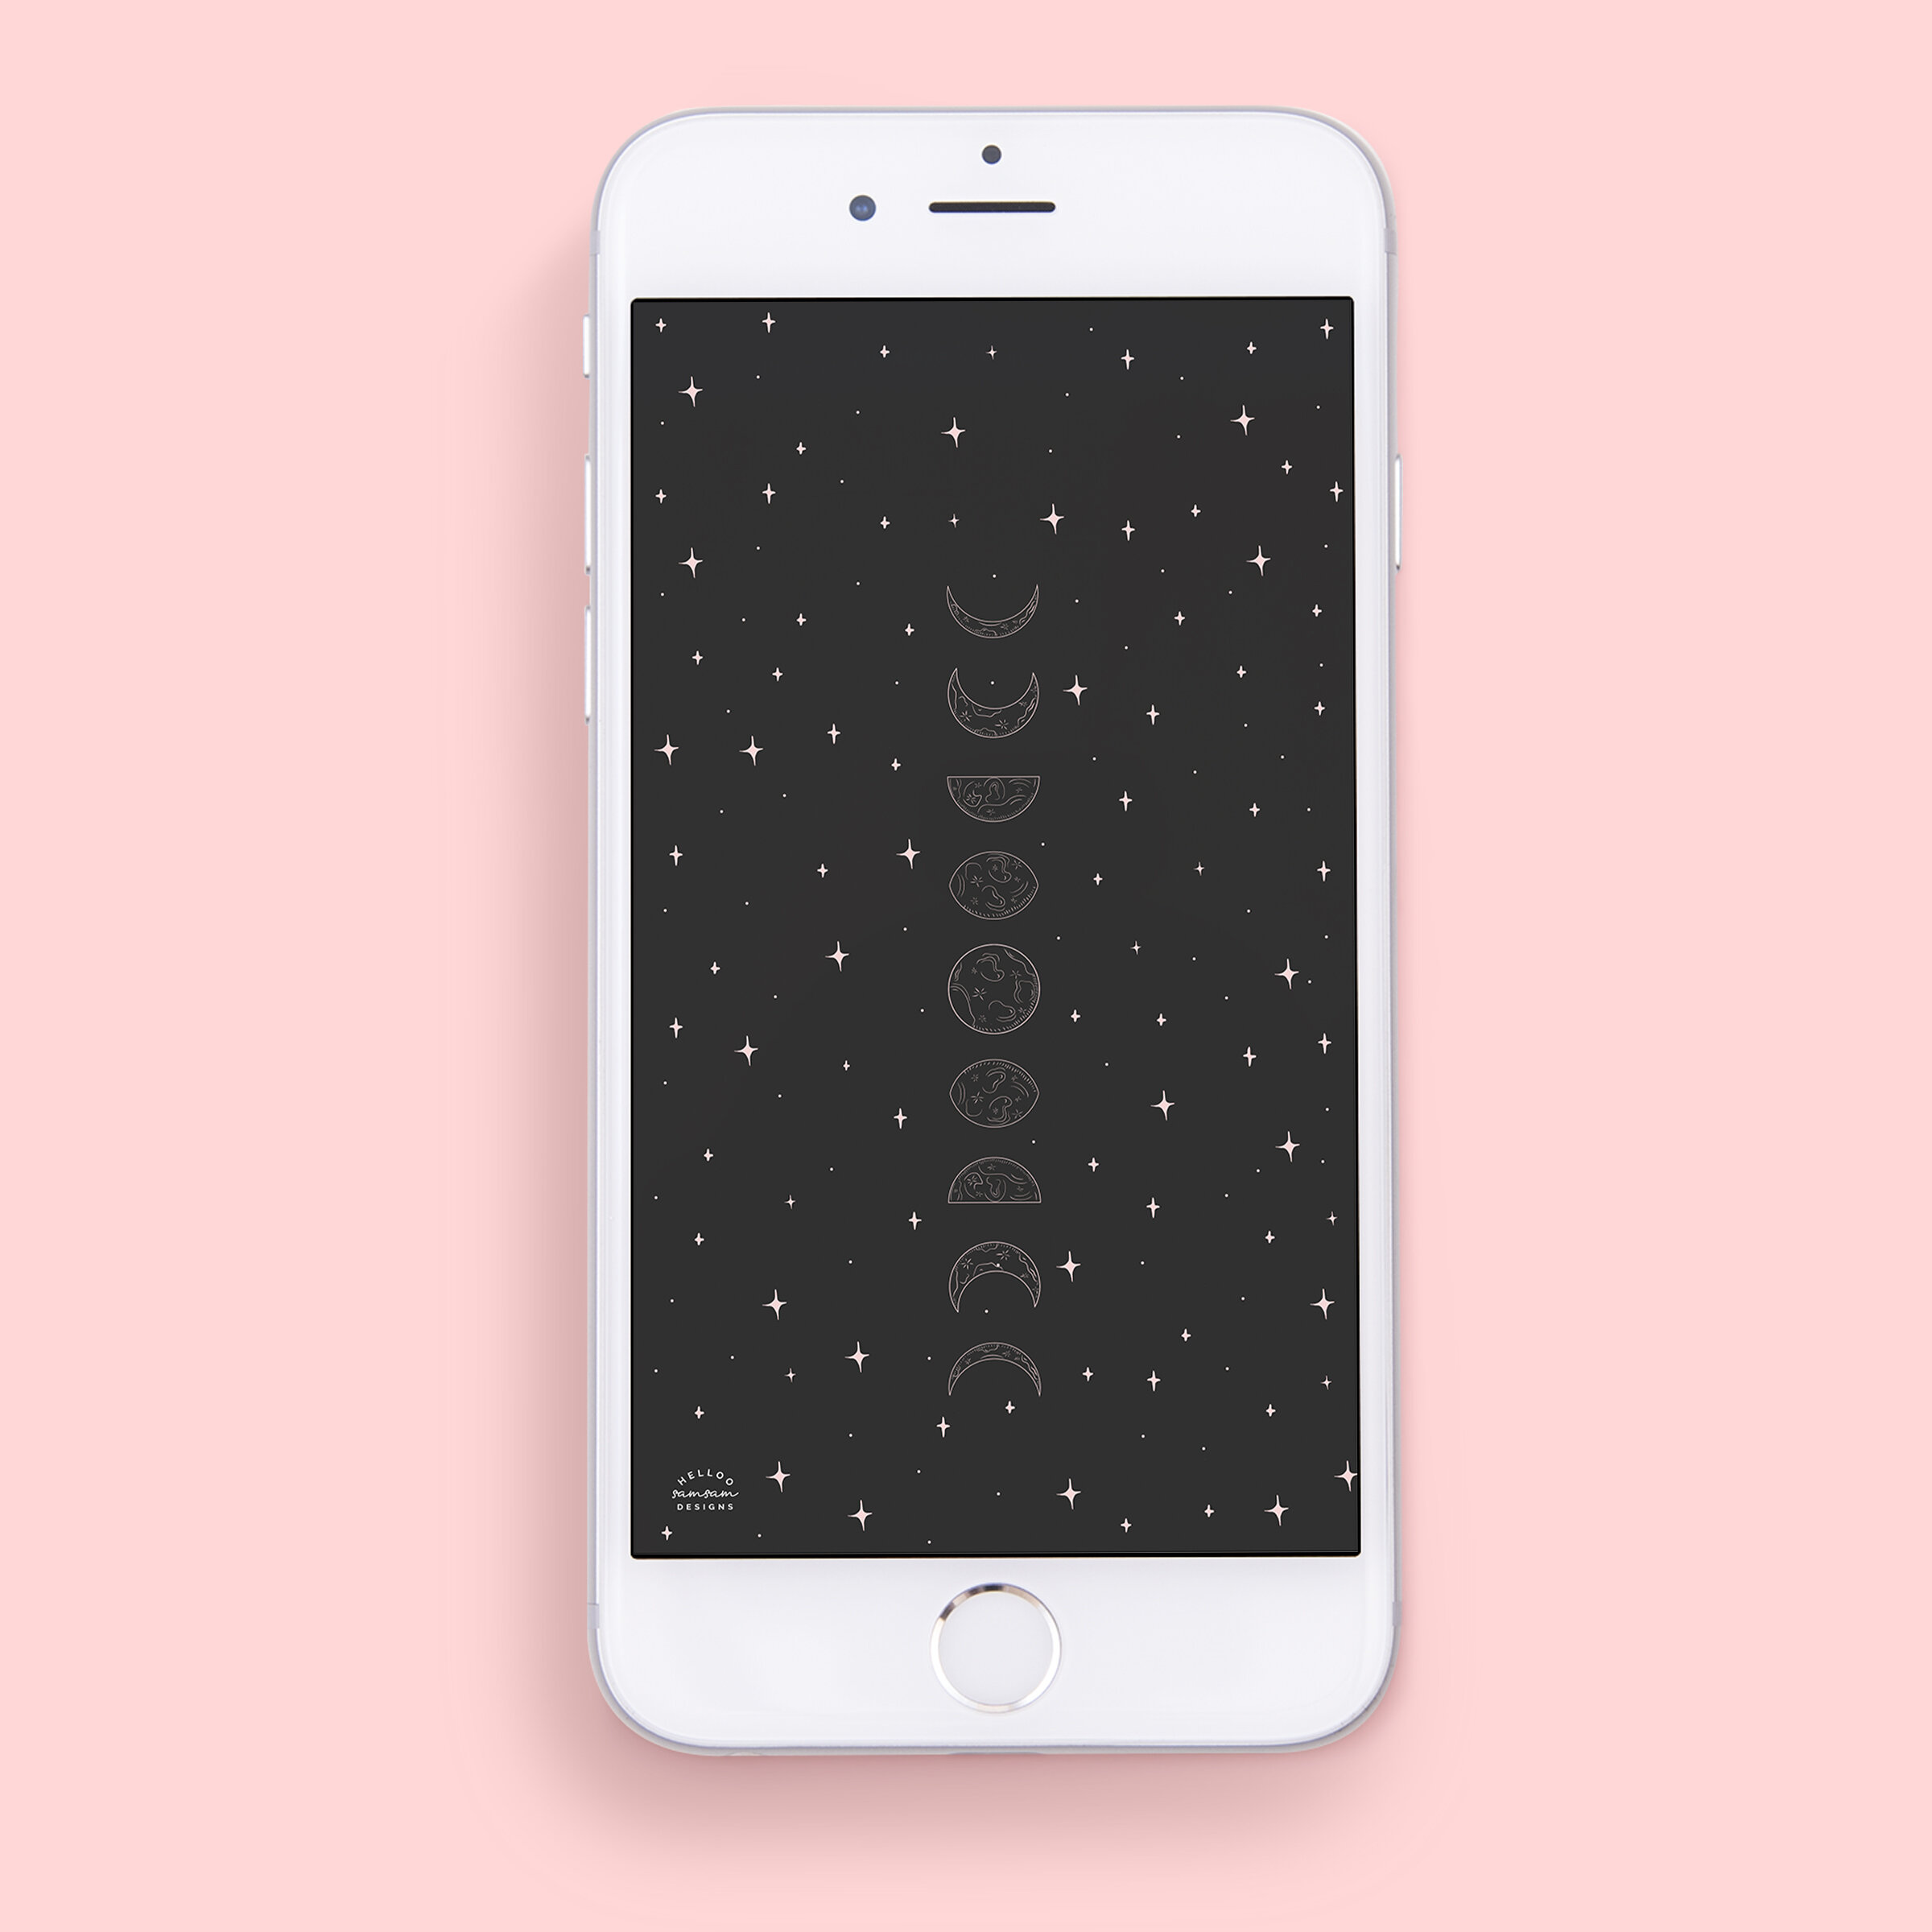 Wallpaper ID 156673  moon phases Moon space free download